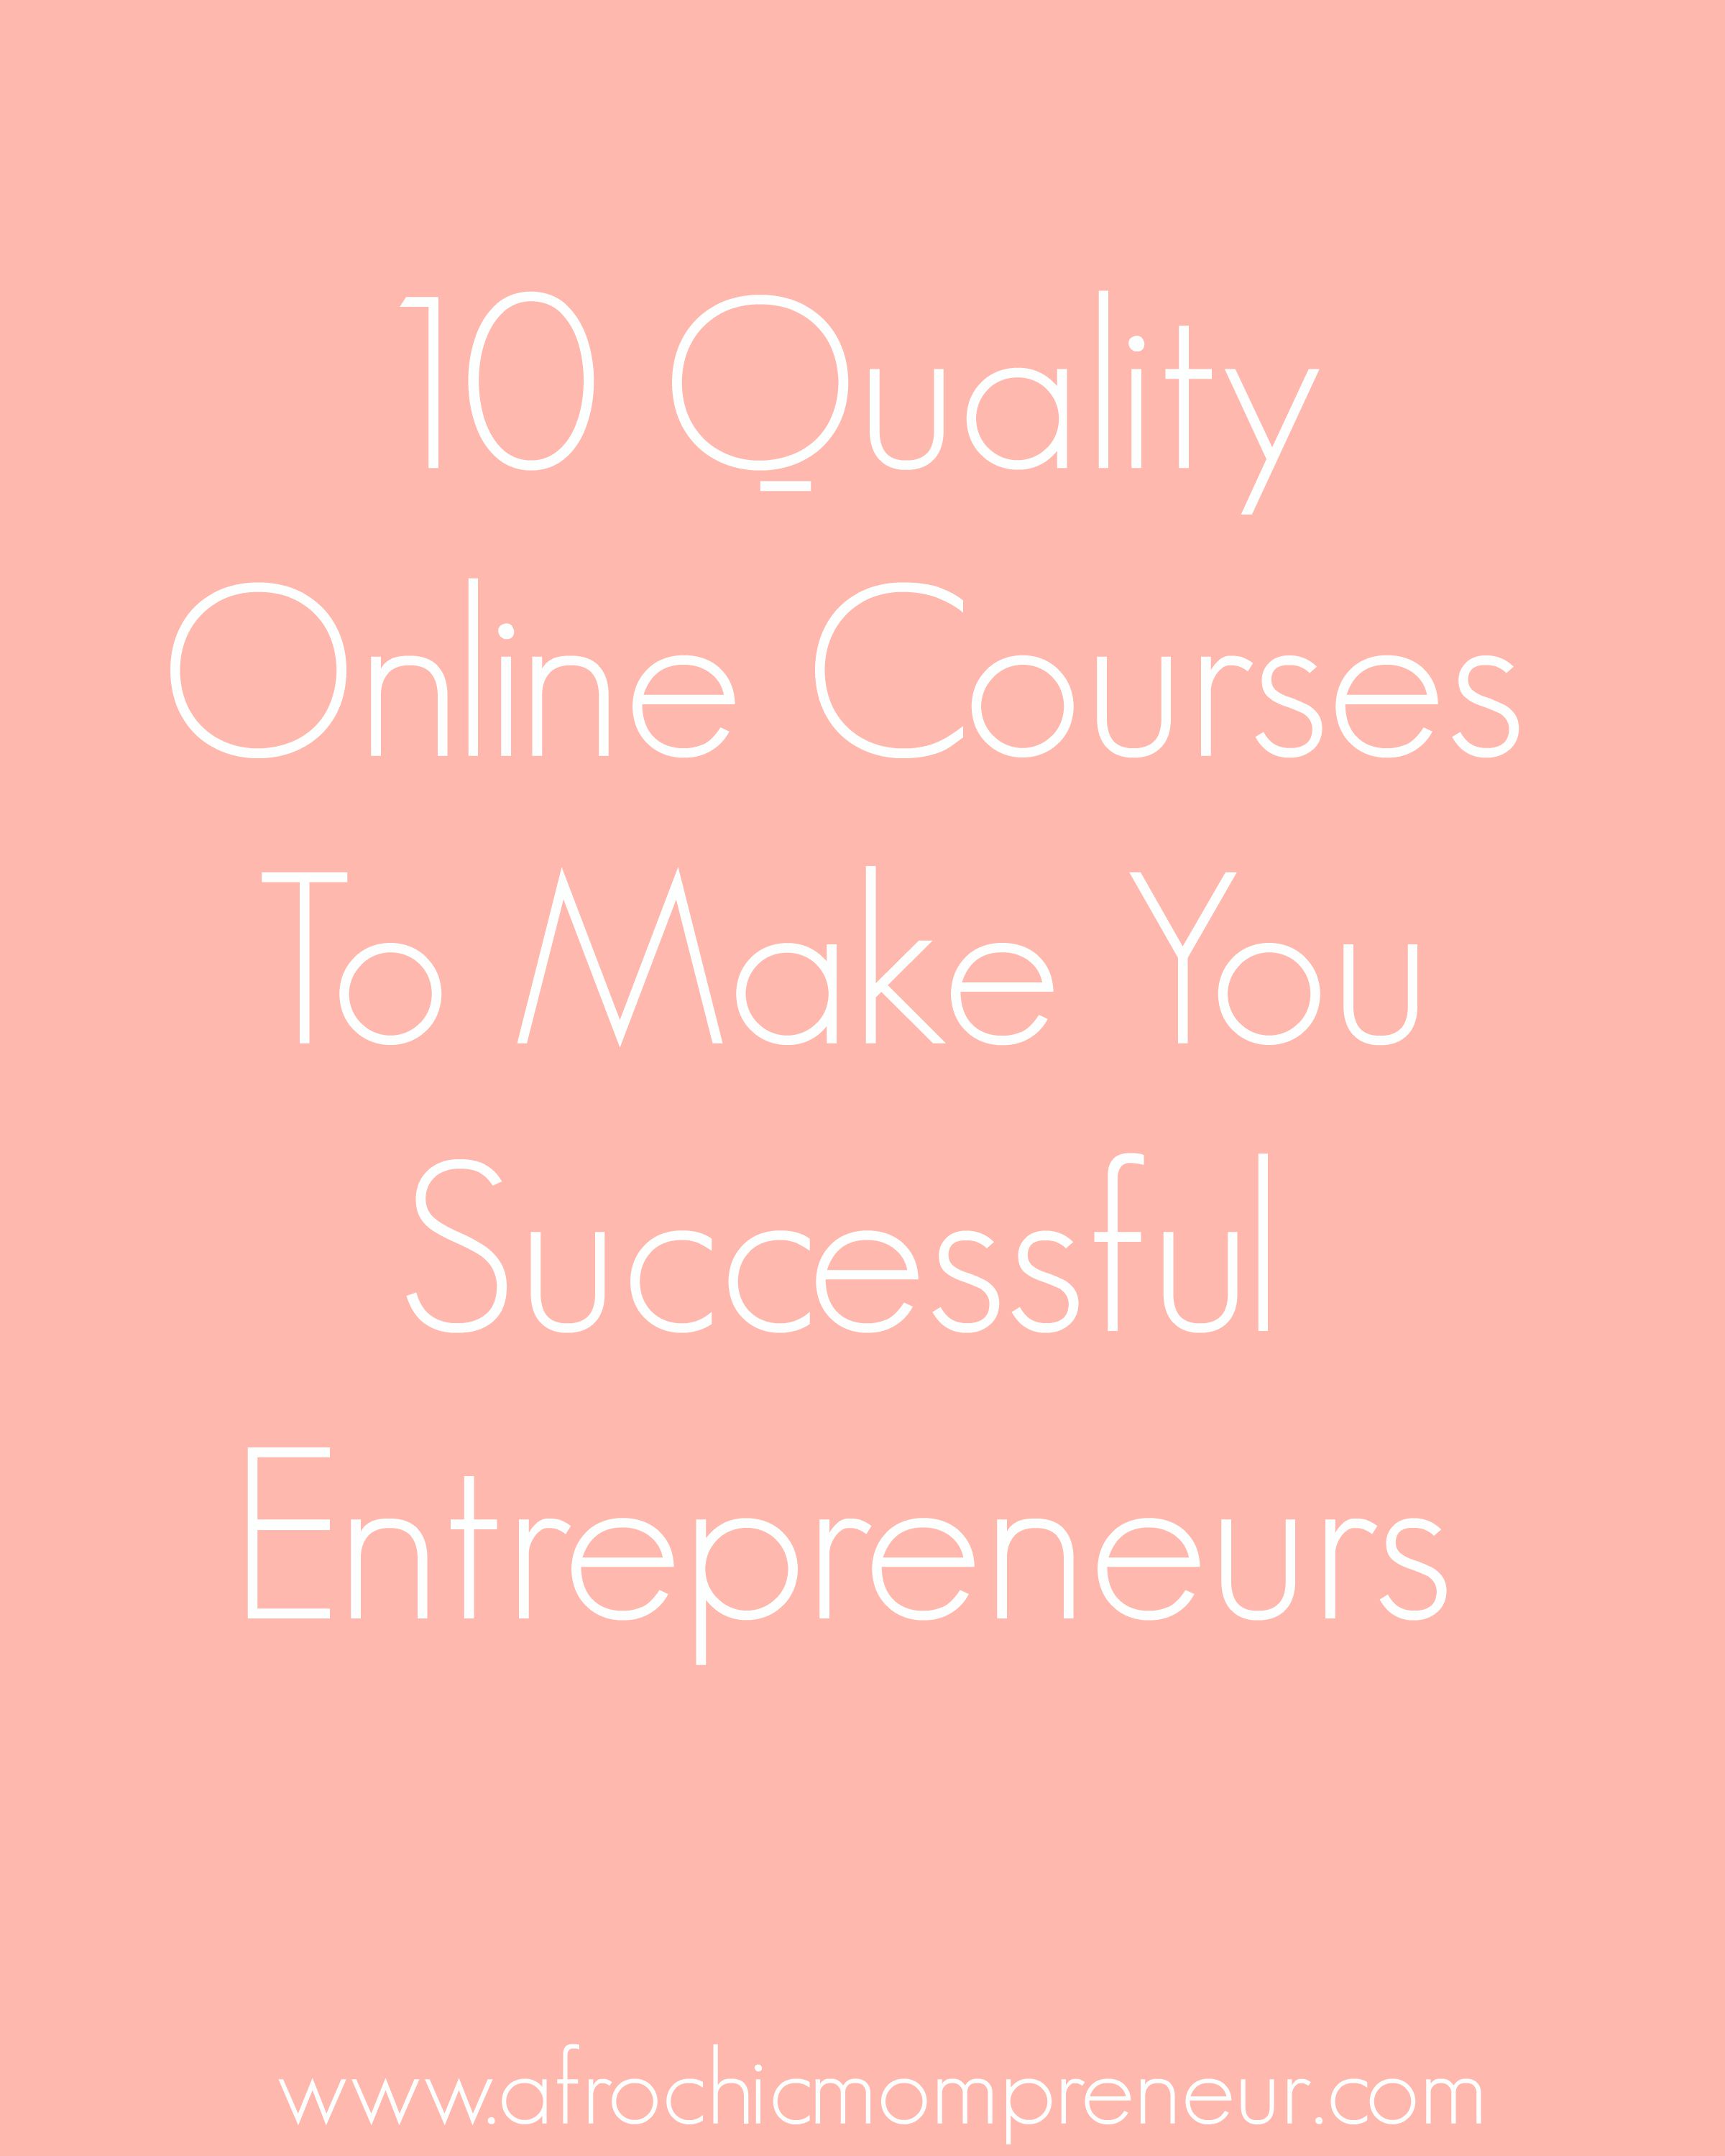 10 Quality Online Courses to Make You Successful Entrepreneurs